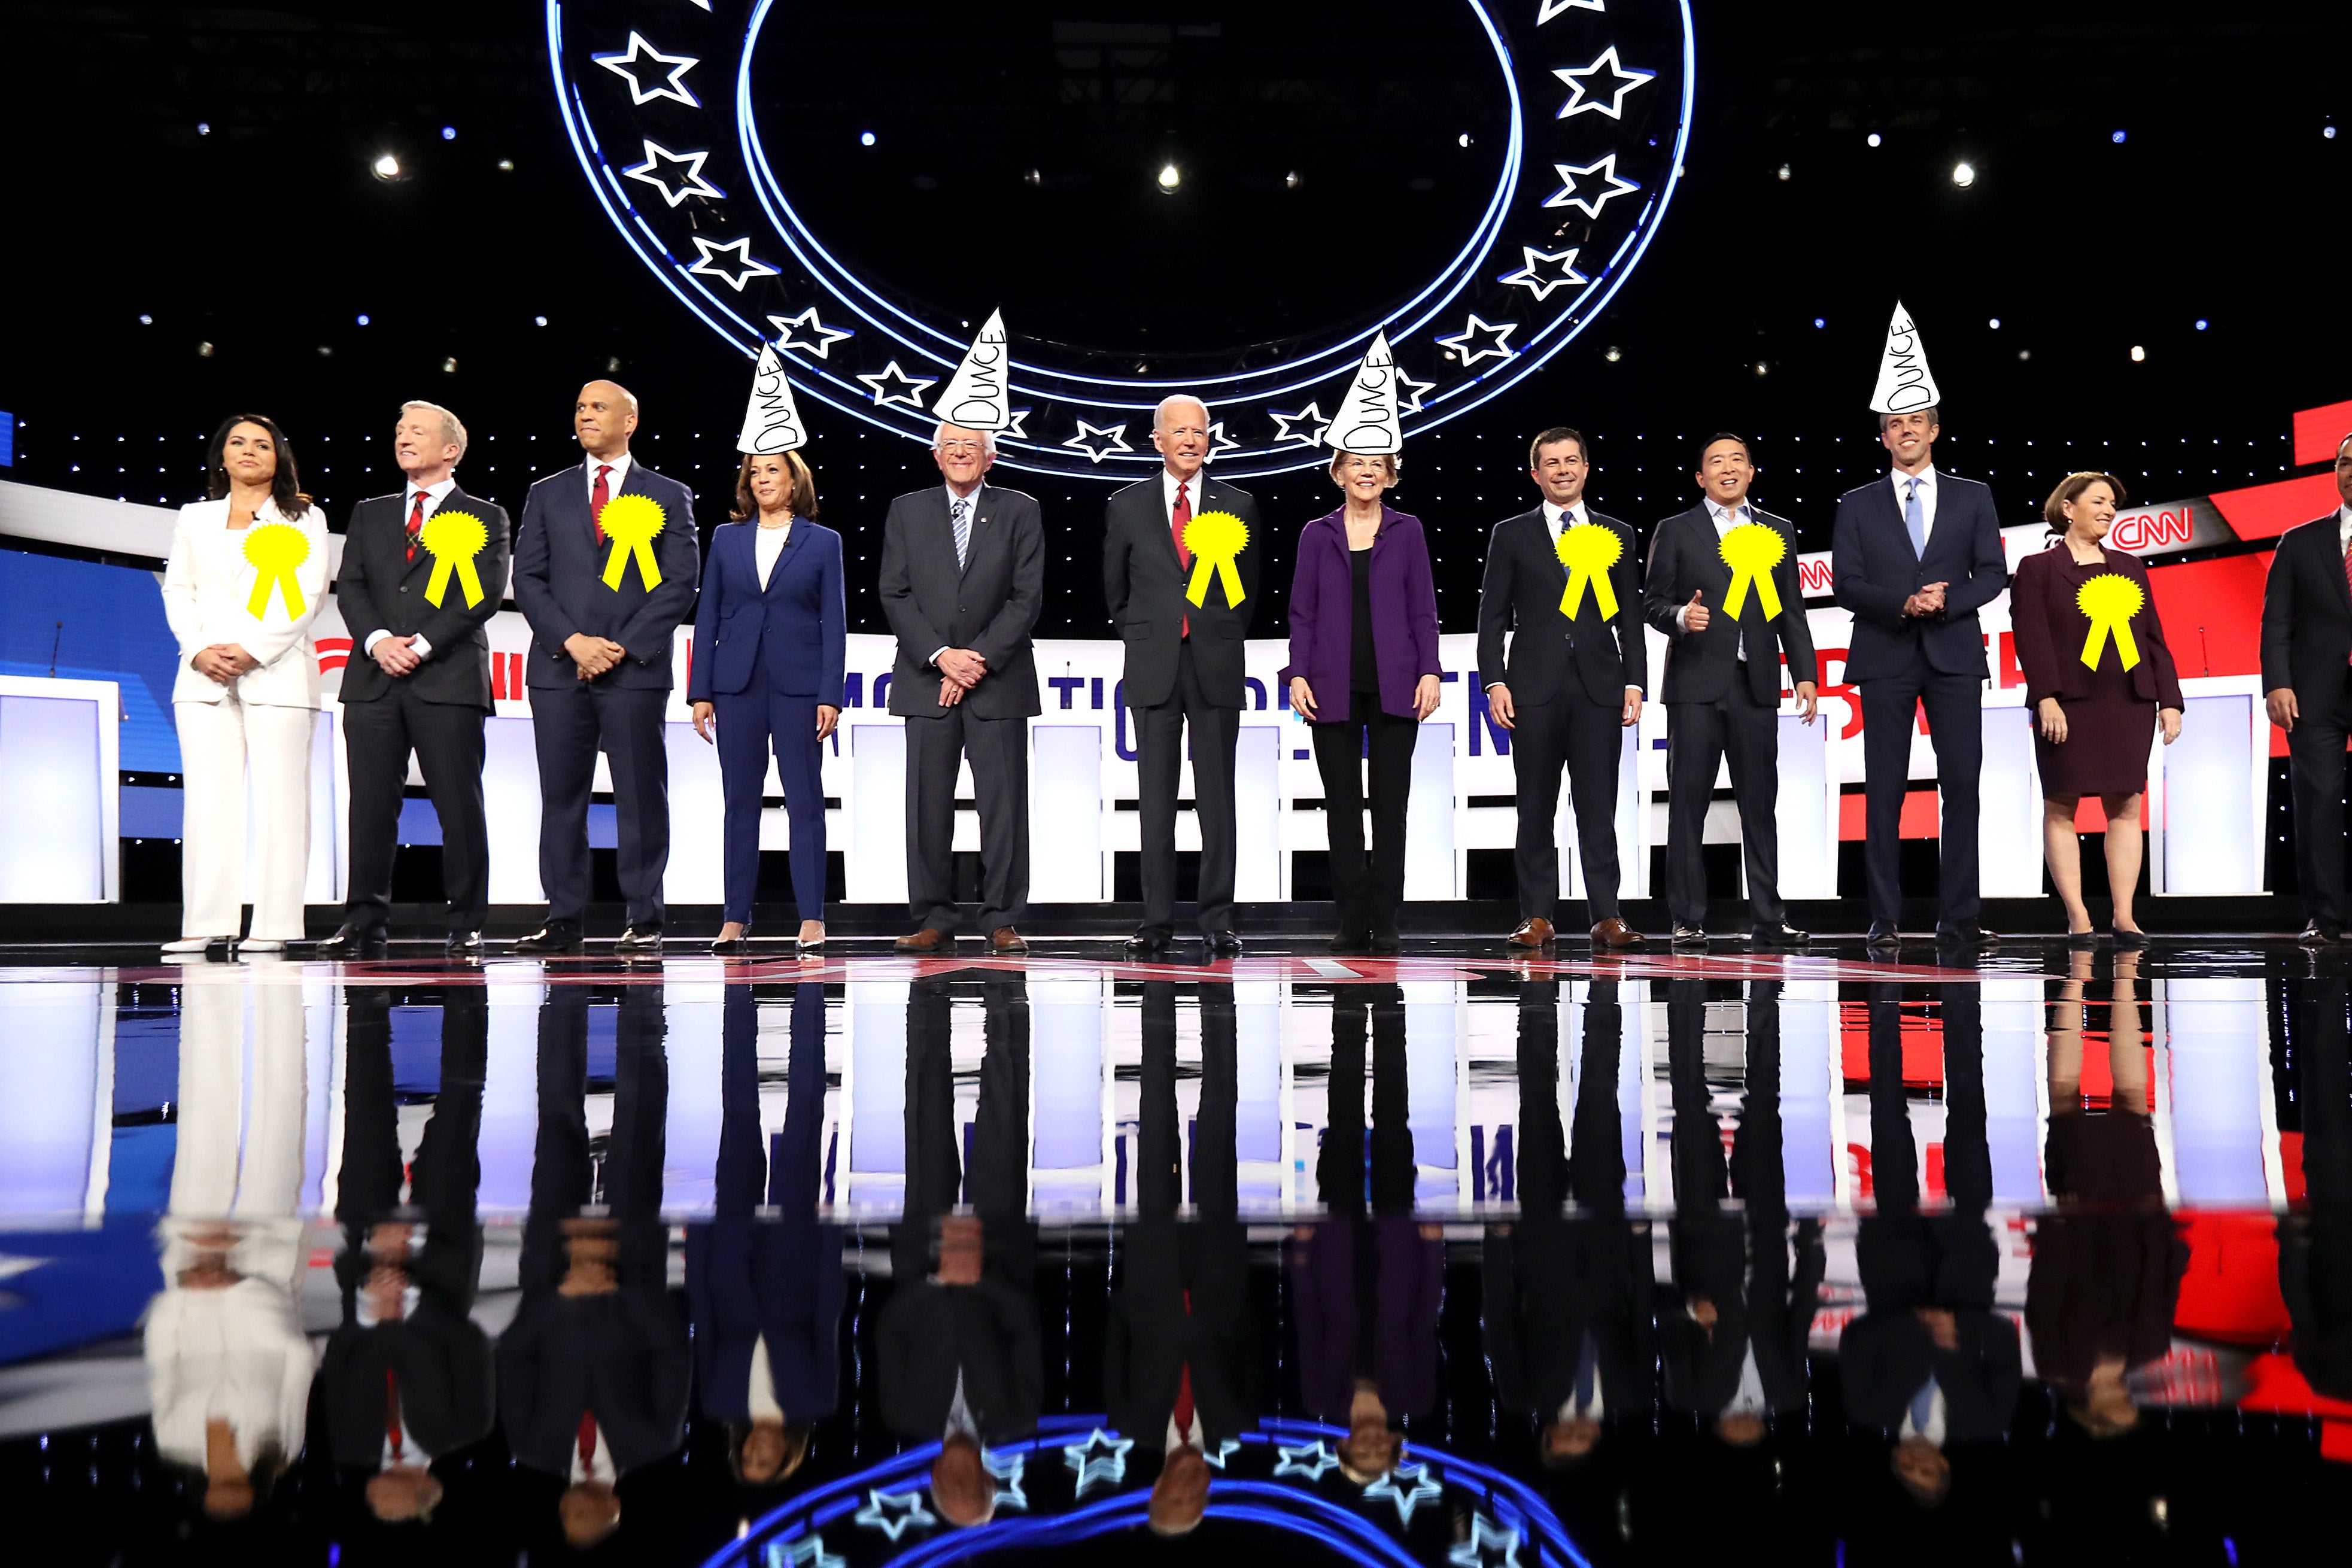 The candidates line up onstage for a showdown of manners.